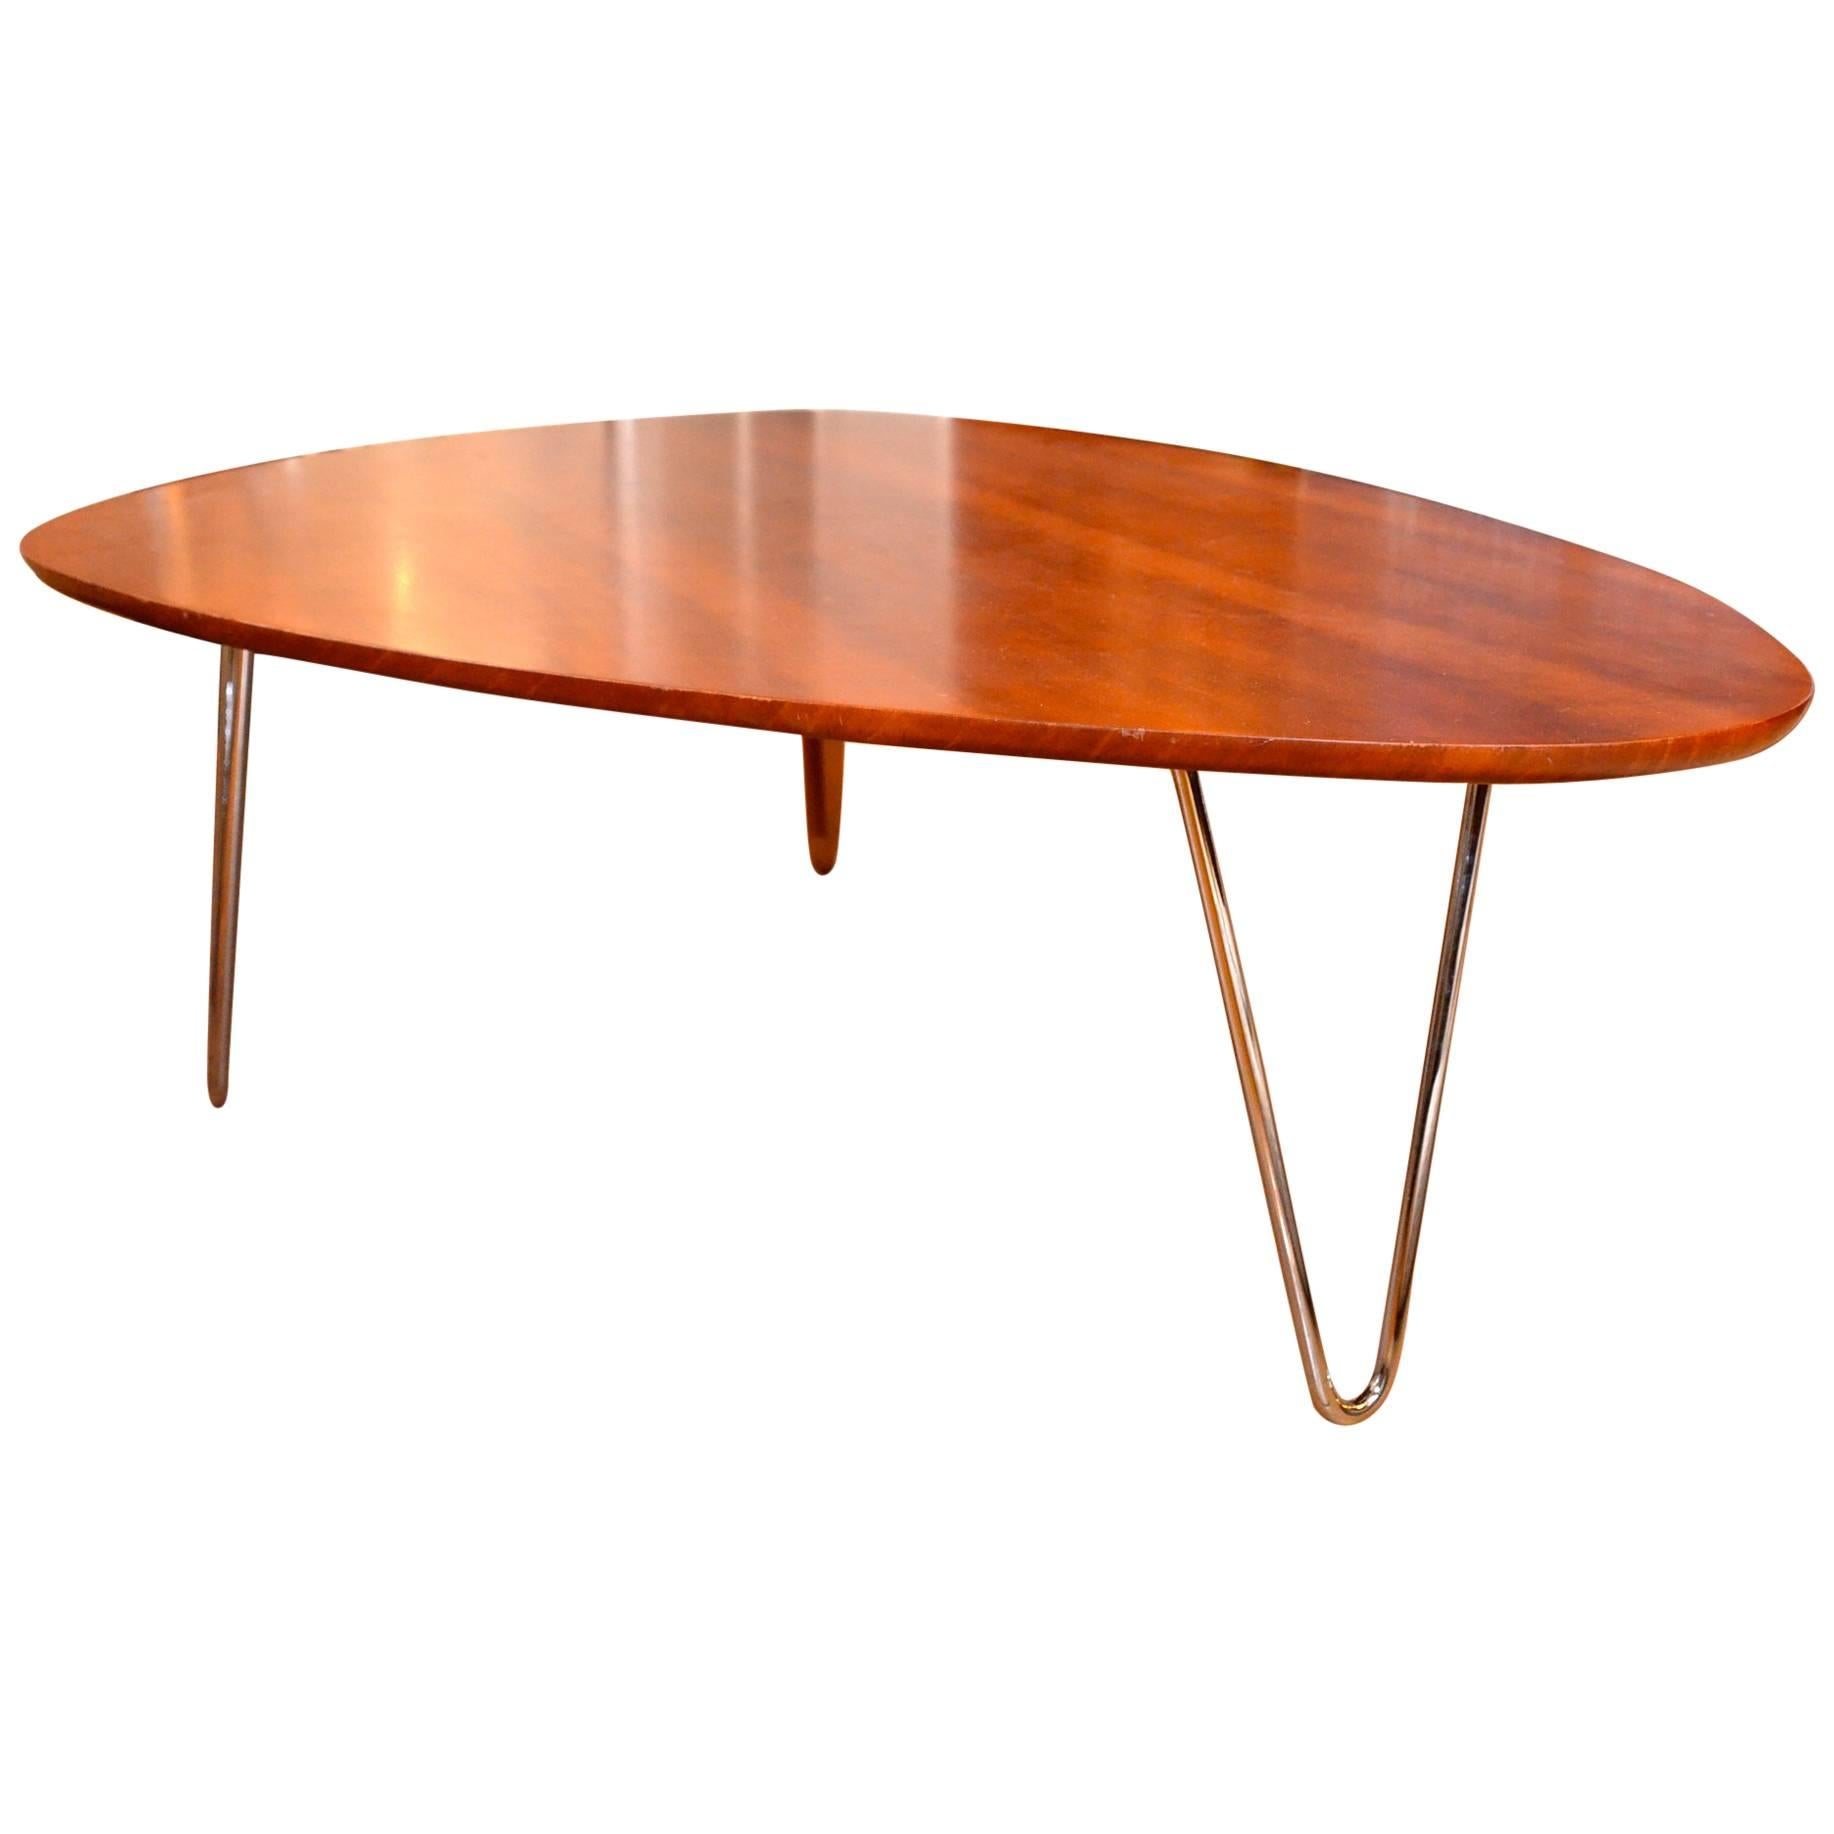 "Rudder" Style Coffee Table For Sale